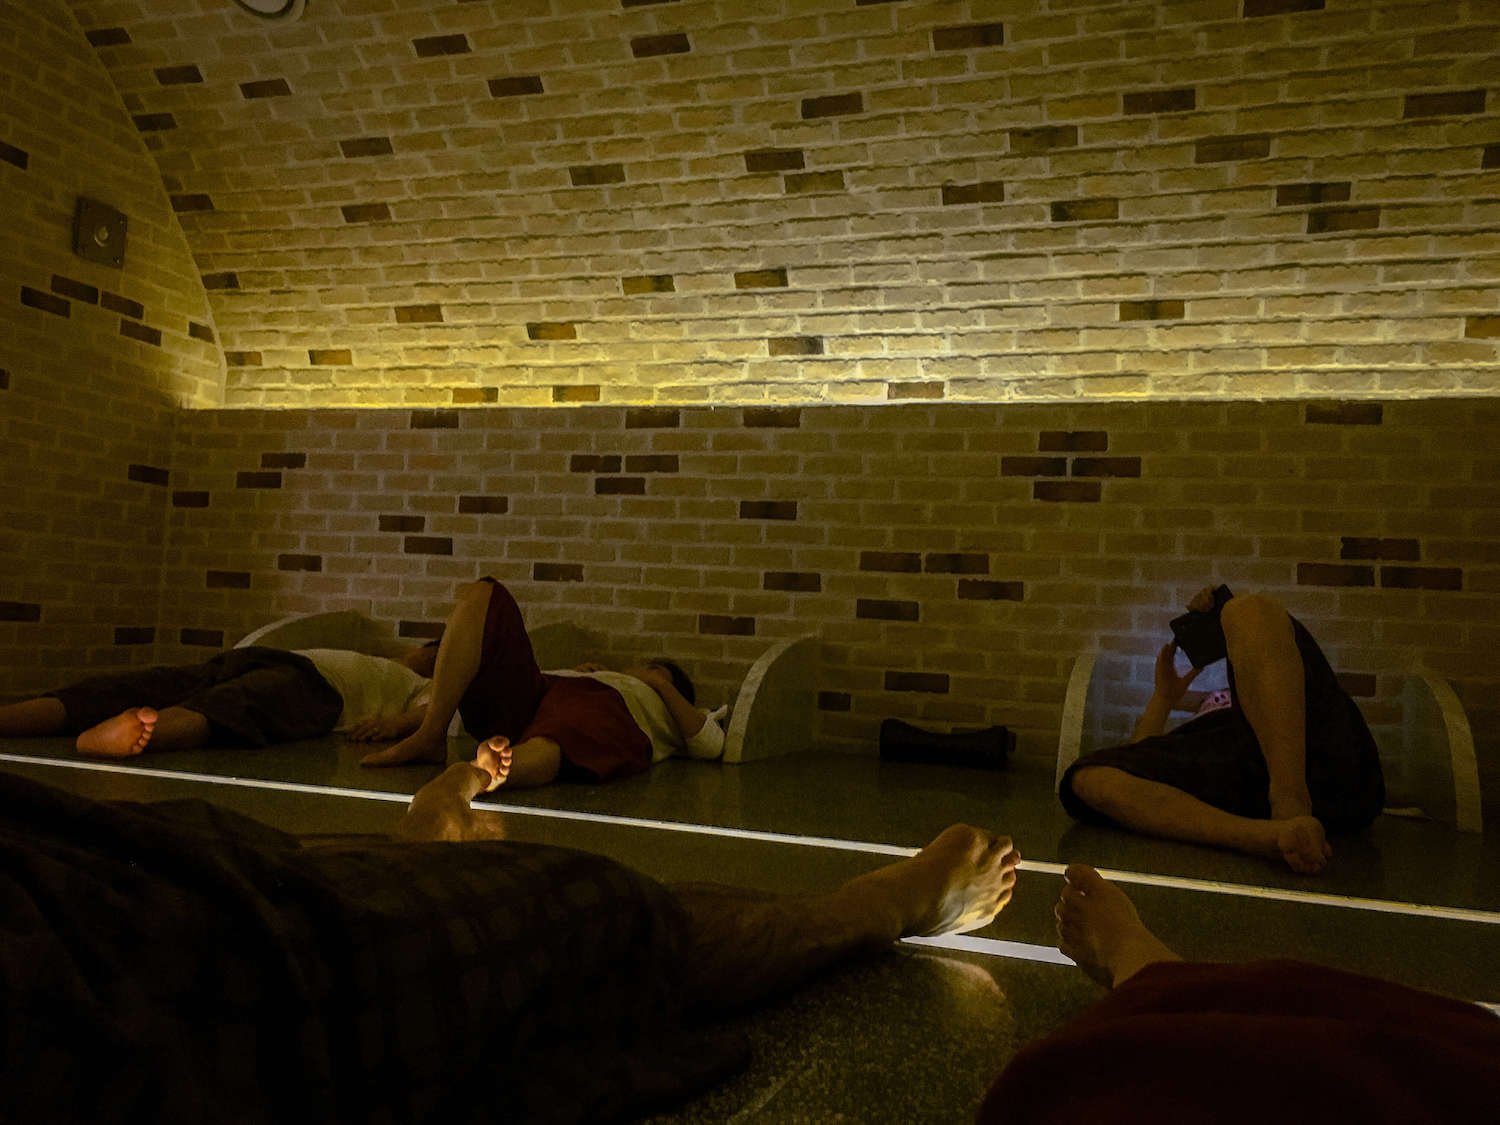 people relaxing in a room at a jjimjilbang